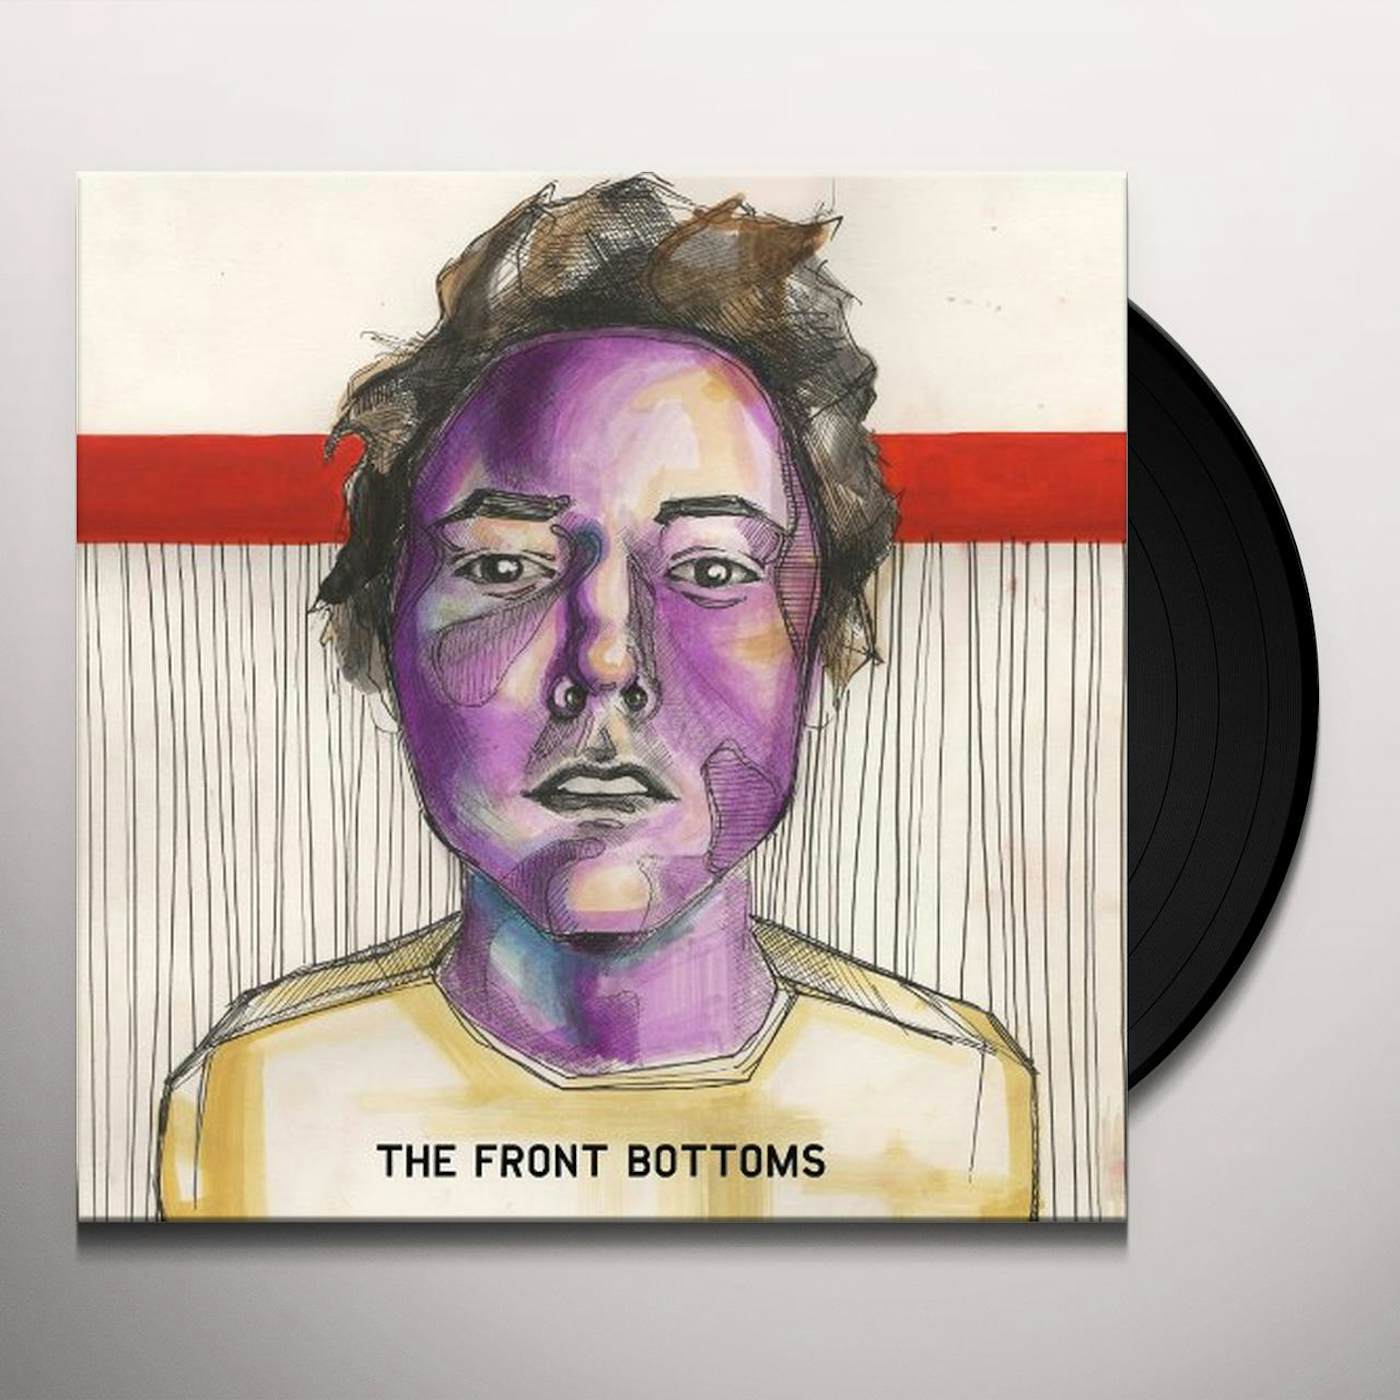  The Front Bottoms S/T Vinyl Record